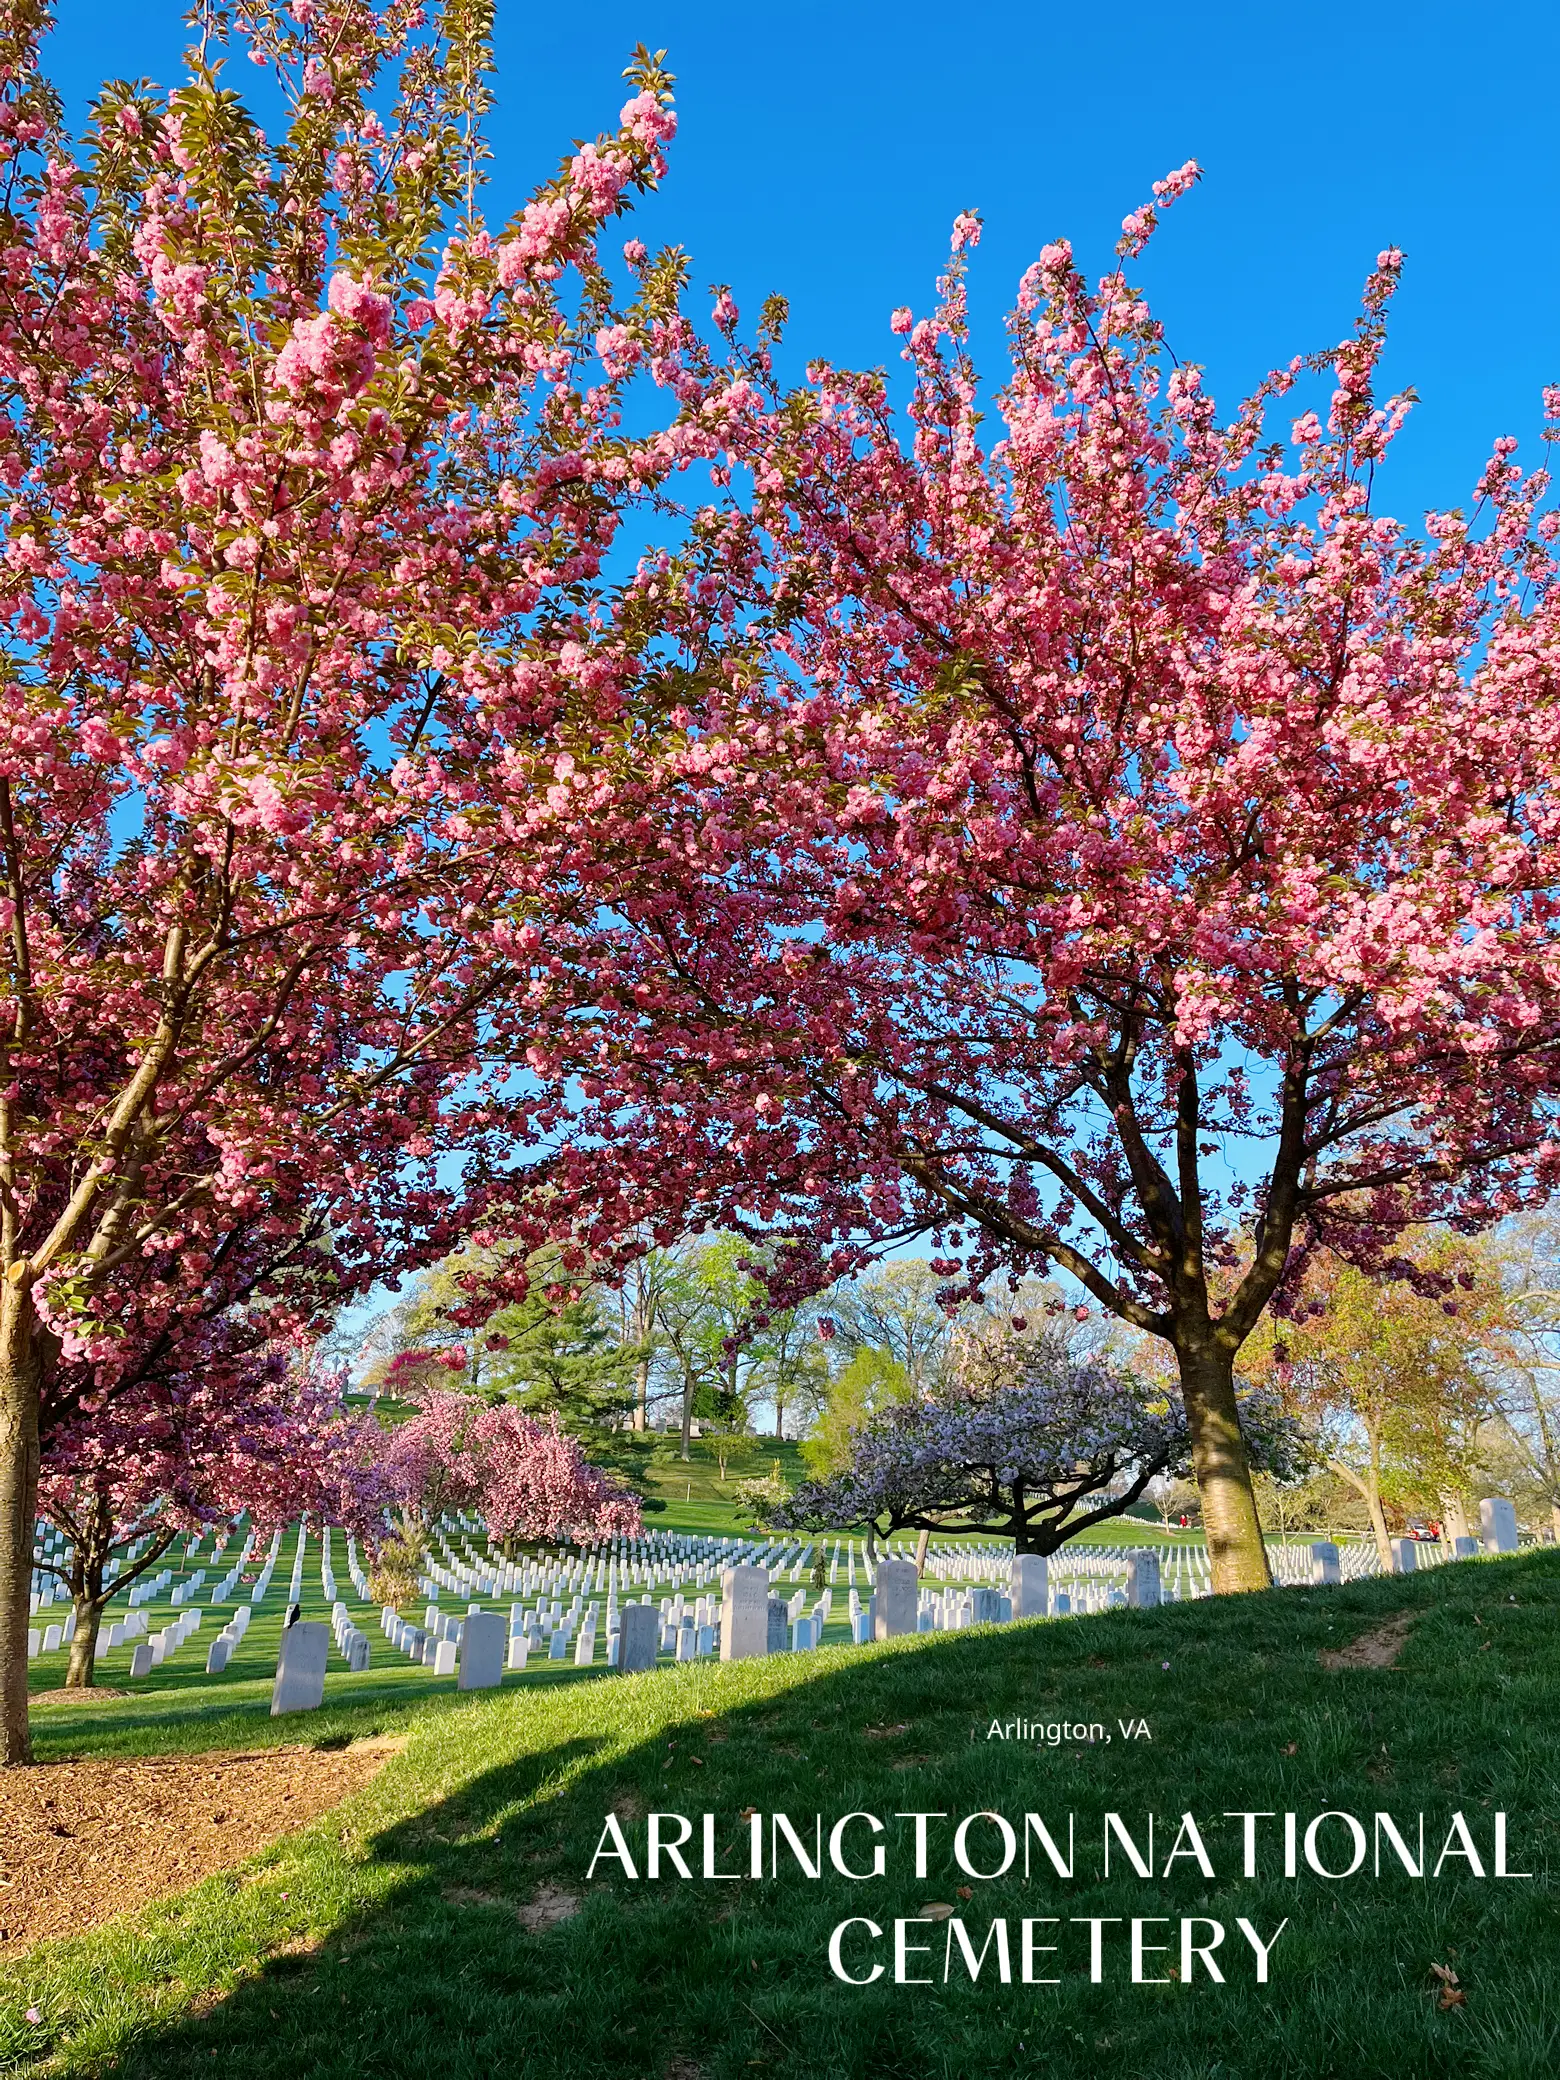 ARLINGTON NATIONAL CEMETERY 🌸's images